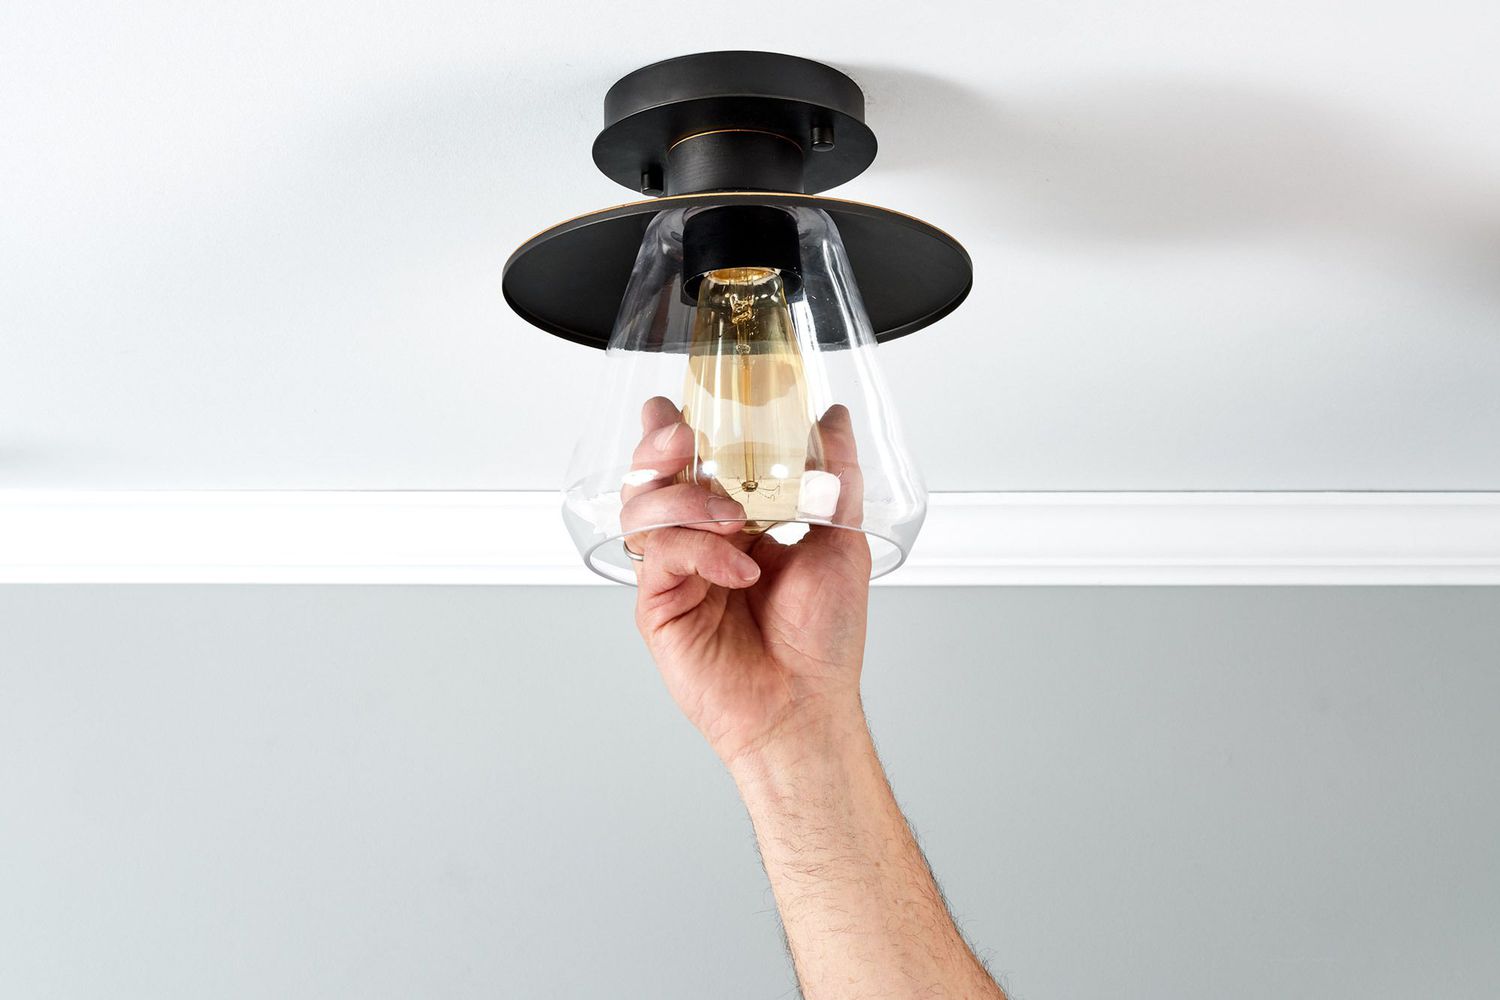 Light bulb being replaced in ceiling light fixture